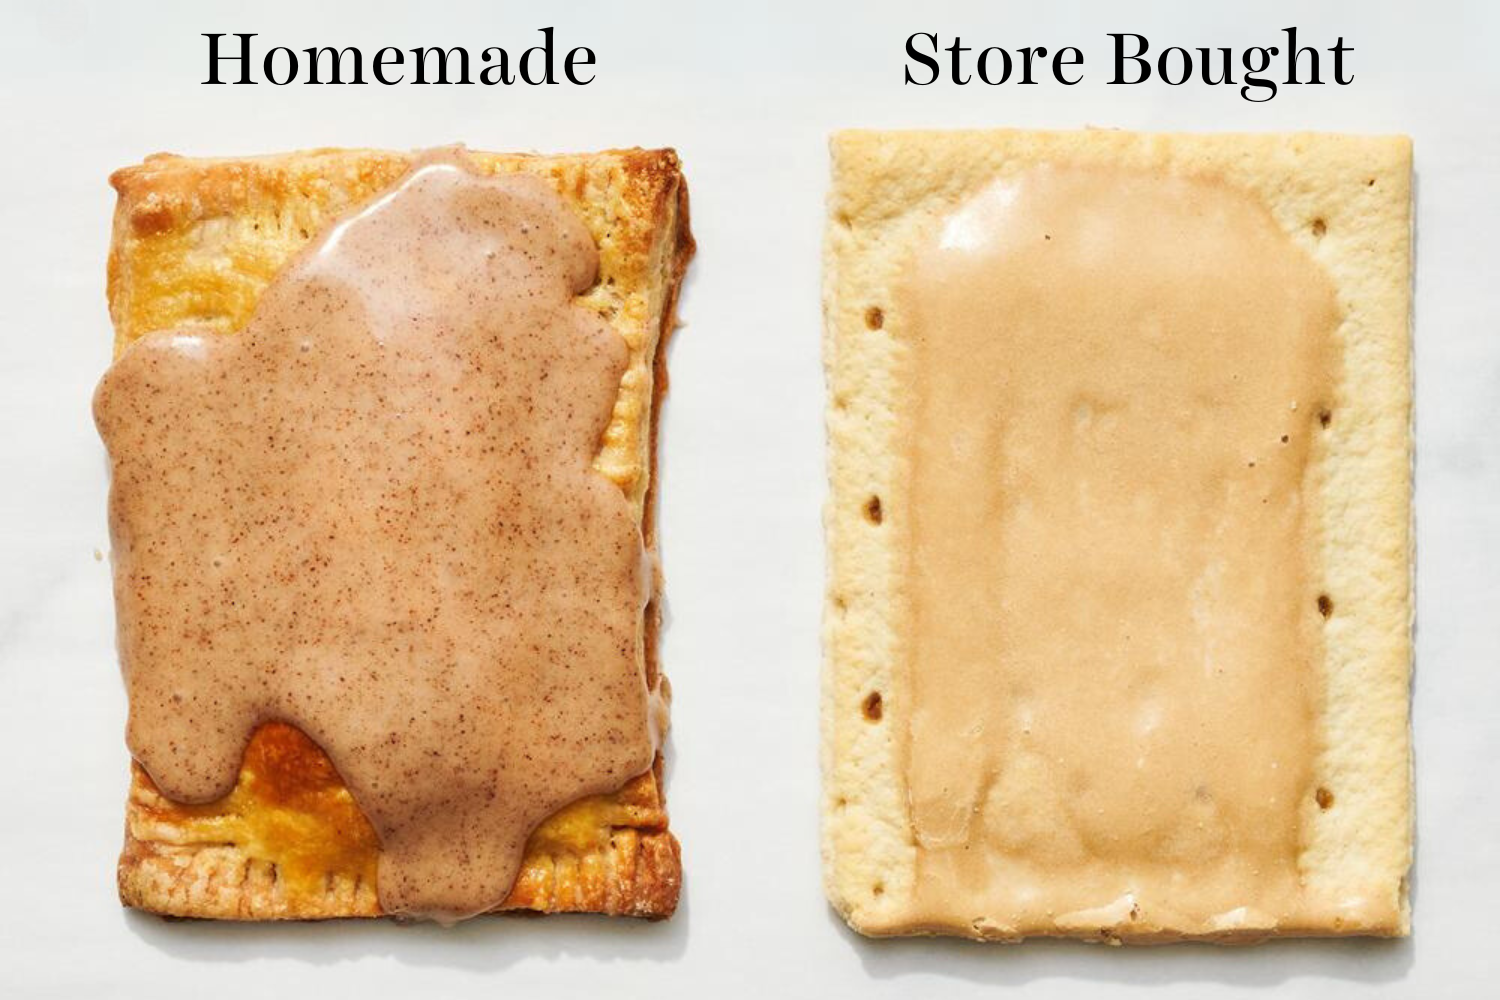 a homemade pop tart next to a store-bought Pop Tart, comparing side-by-side.